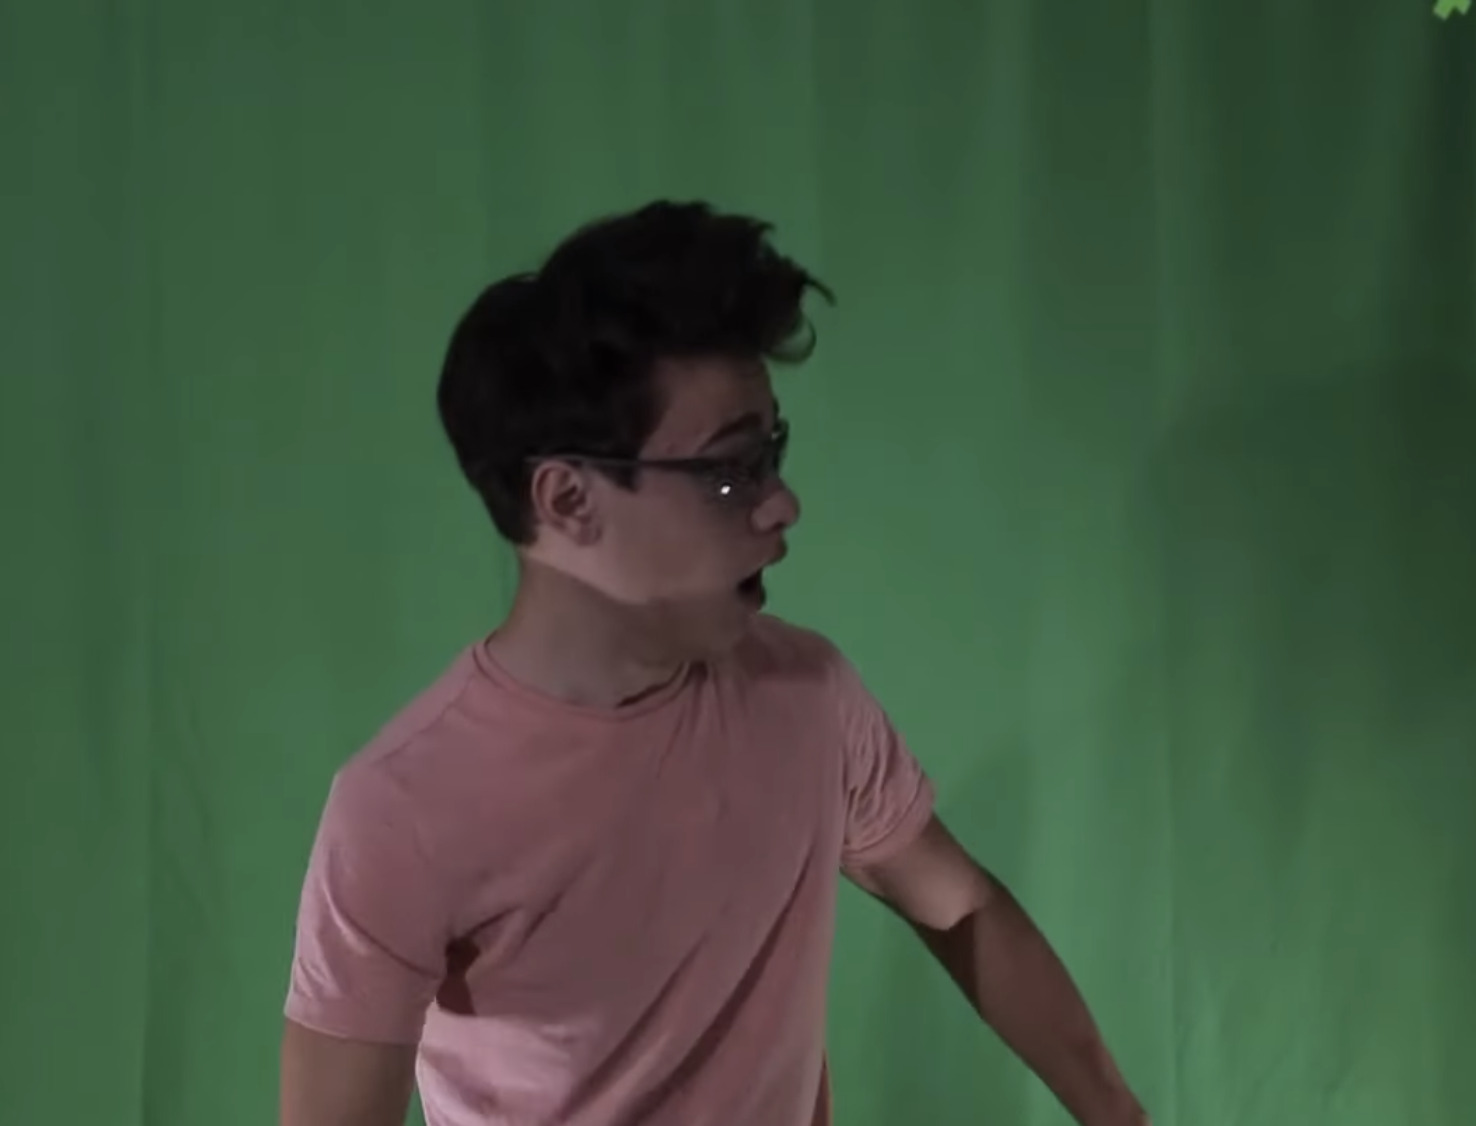 Me in front of a green screen